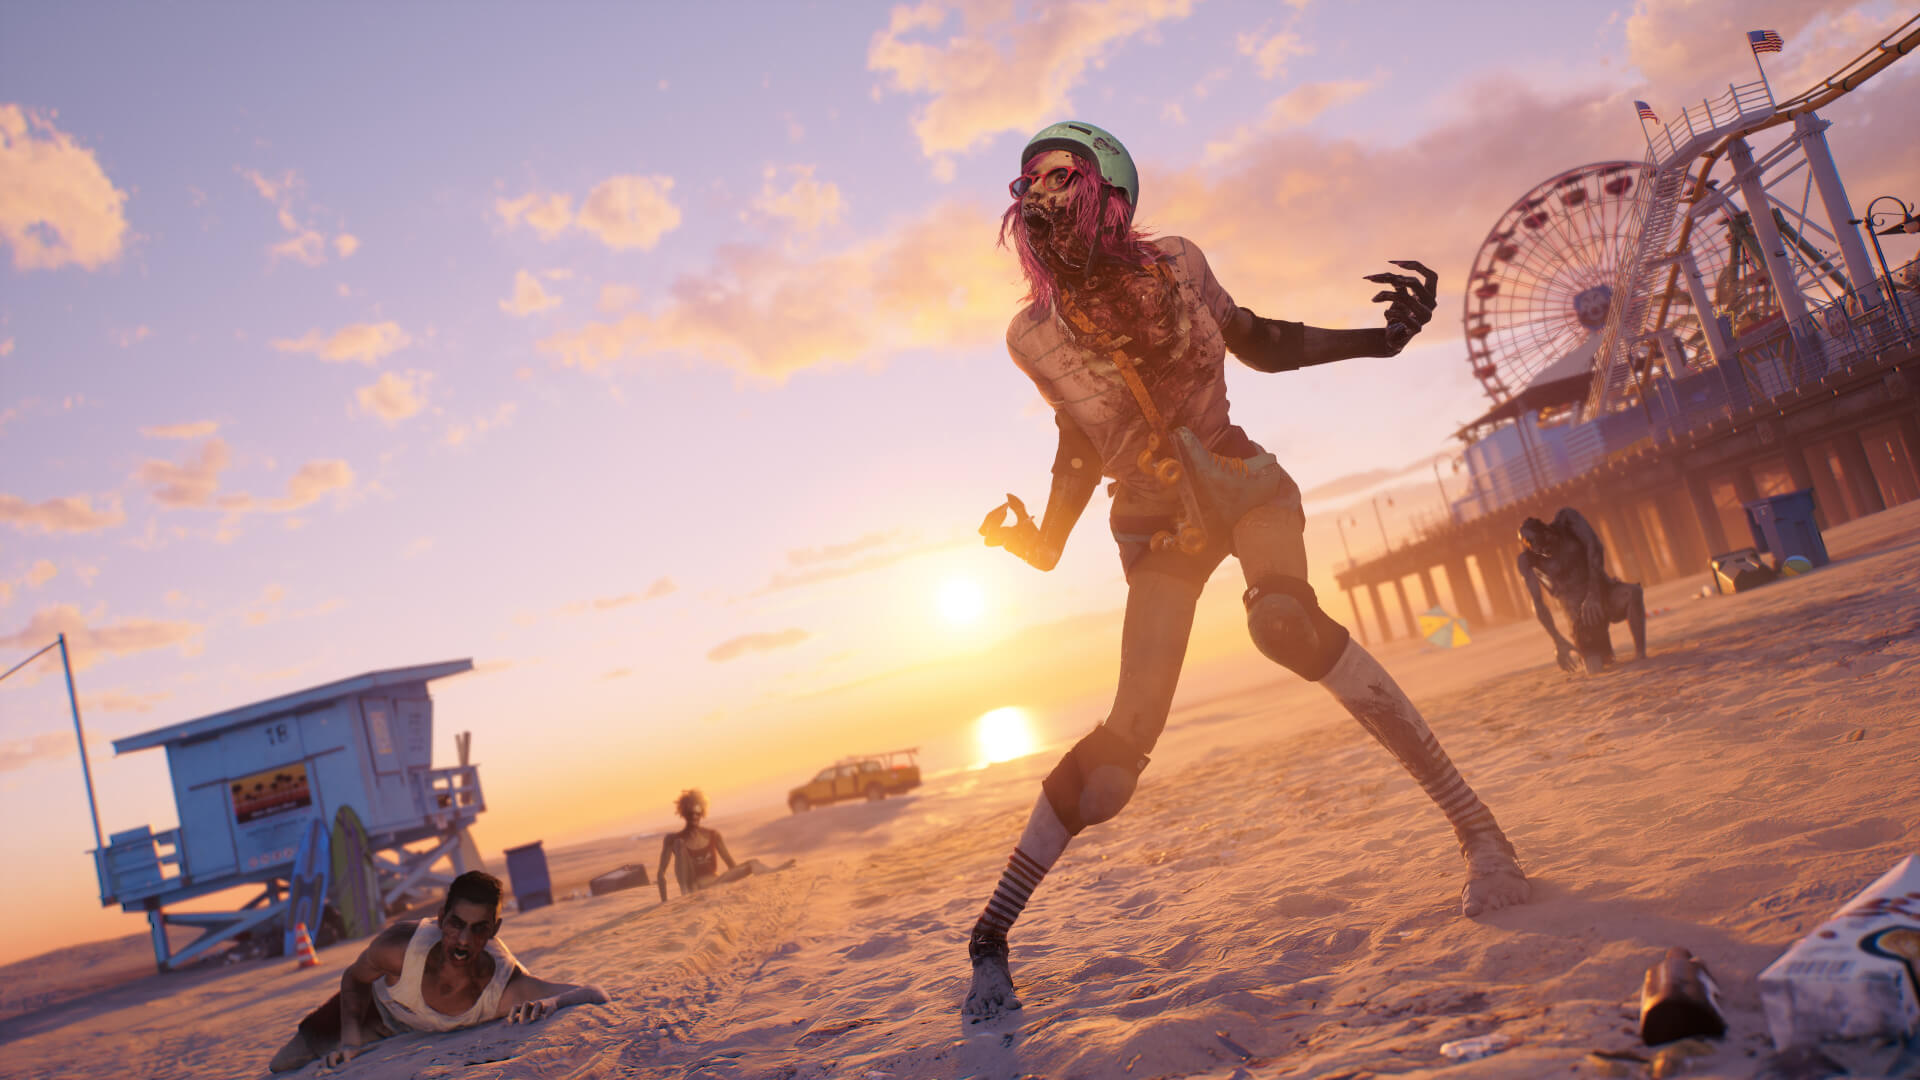 Dead Island 2 gets slightly delayed again to April 2023